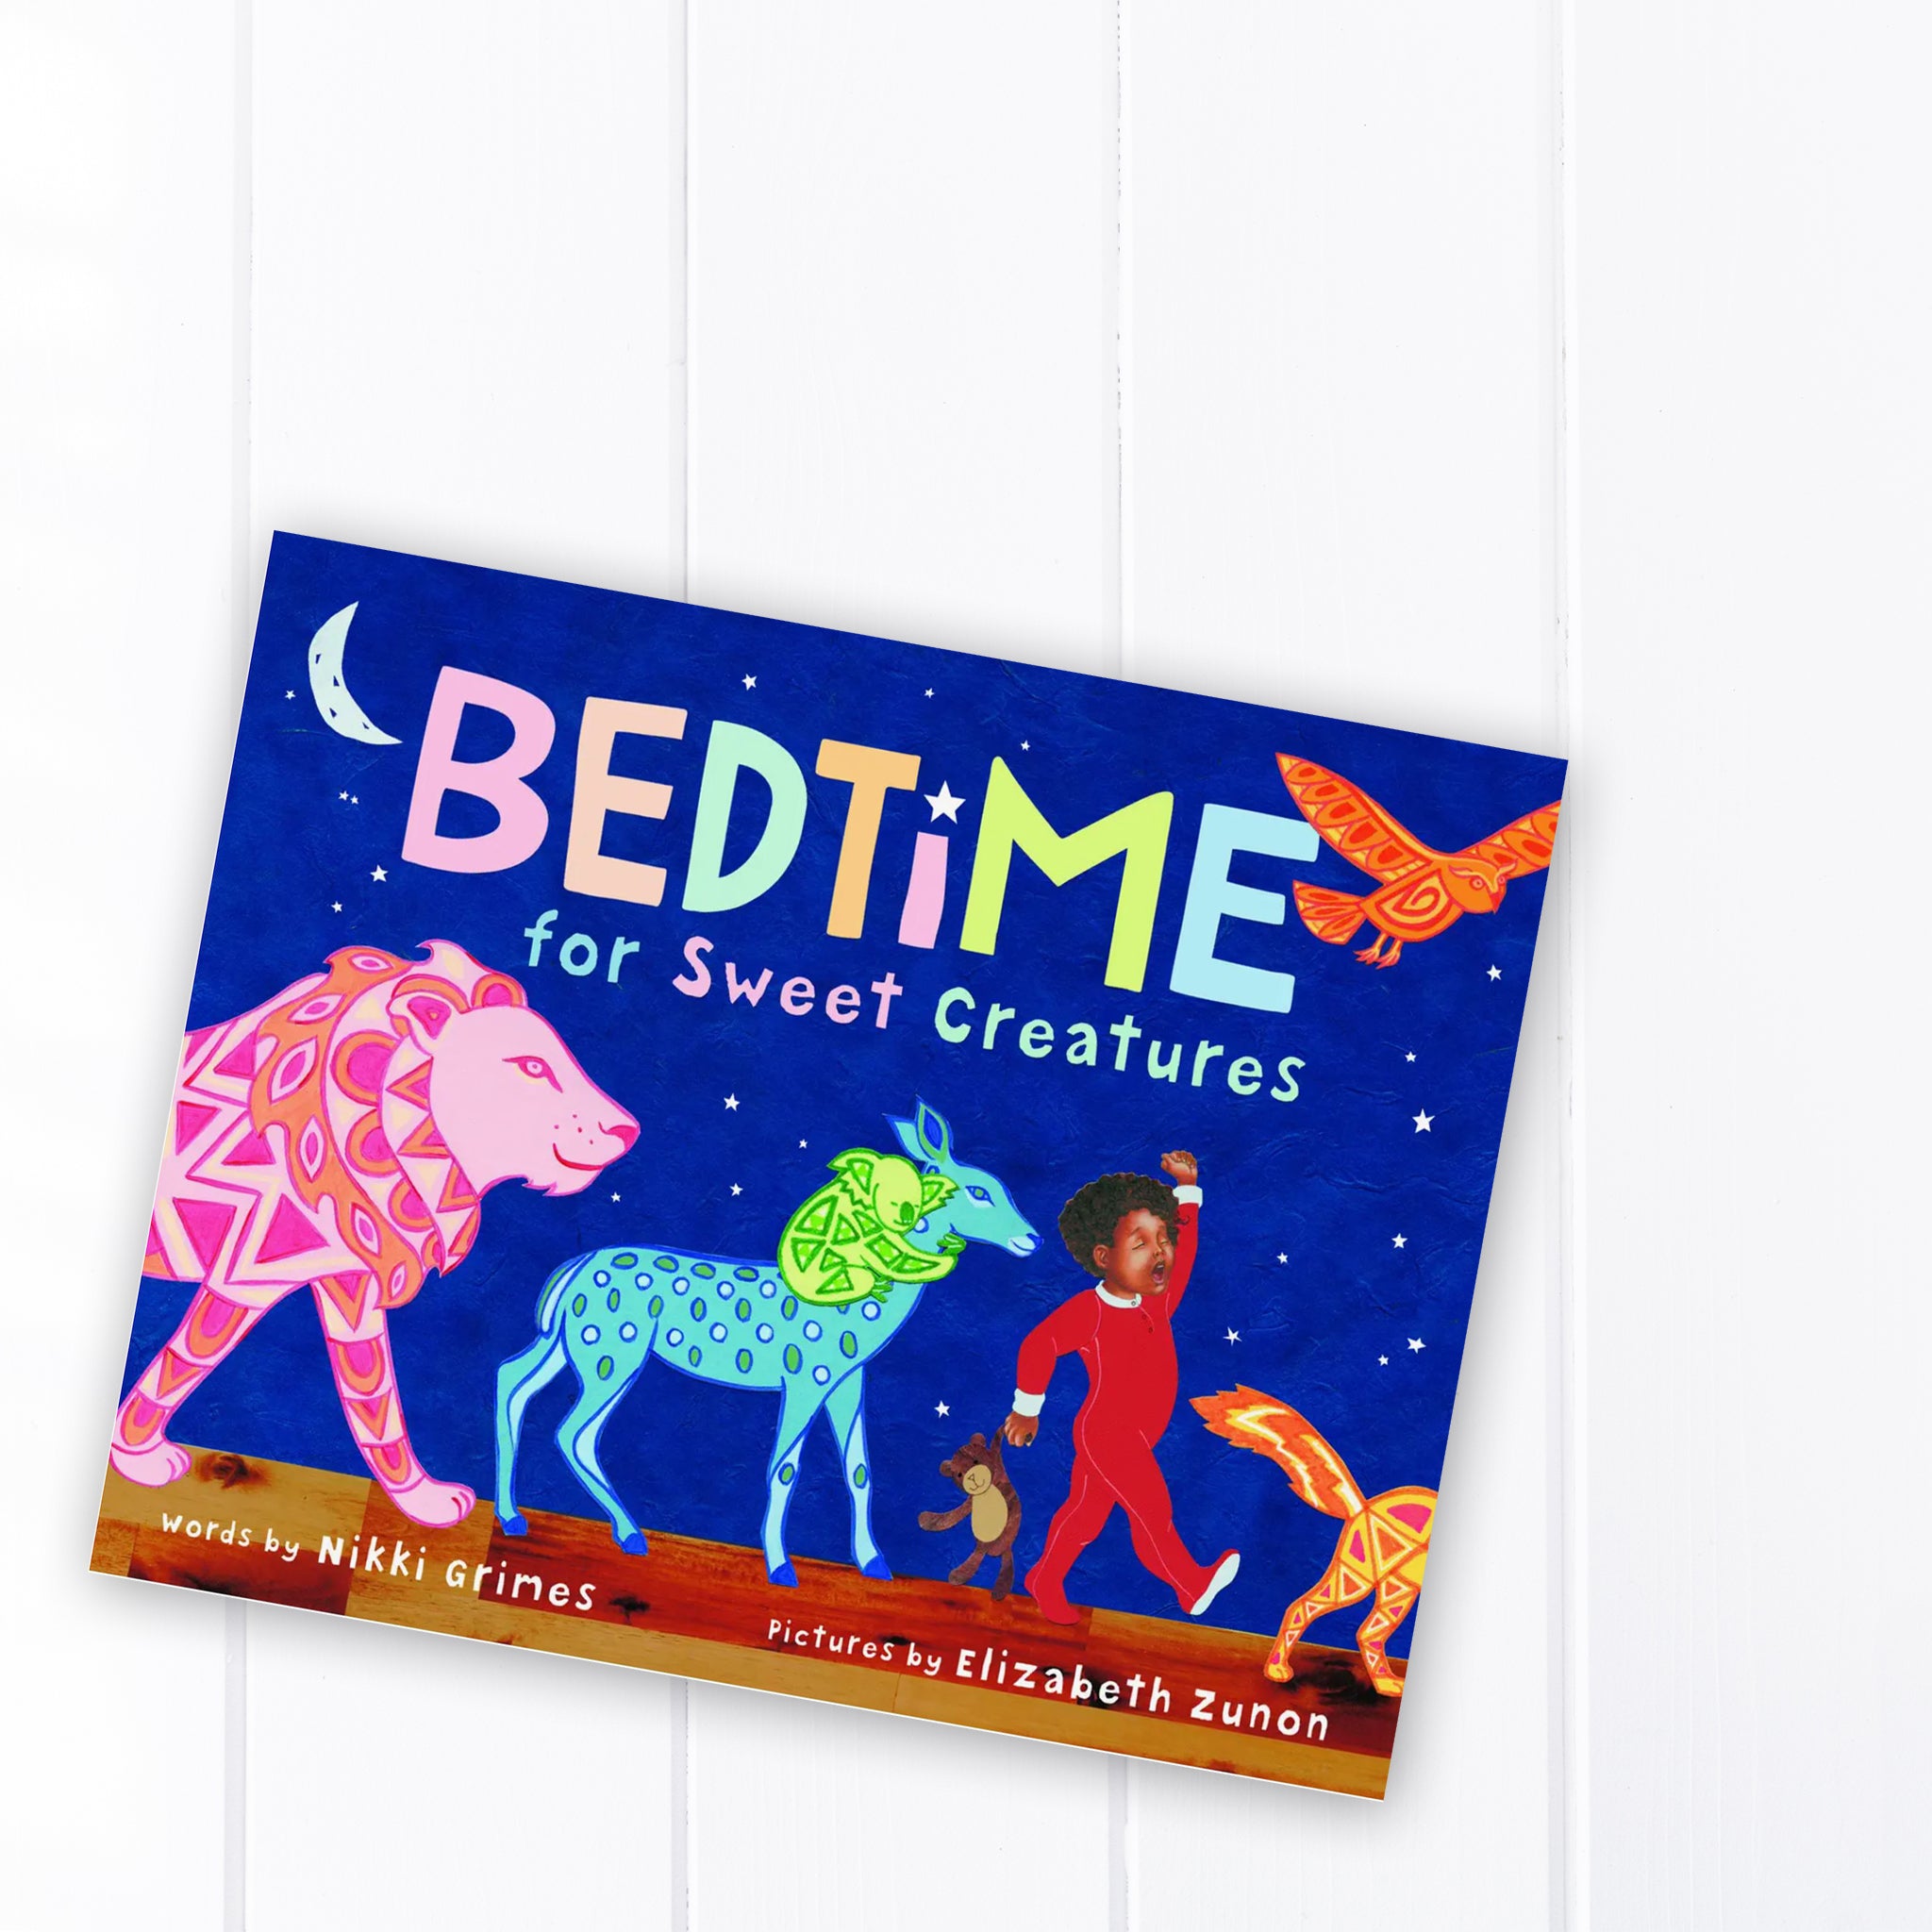 Bedtime for Sweet Creatures Book